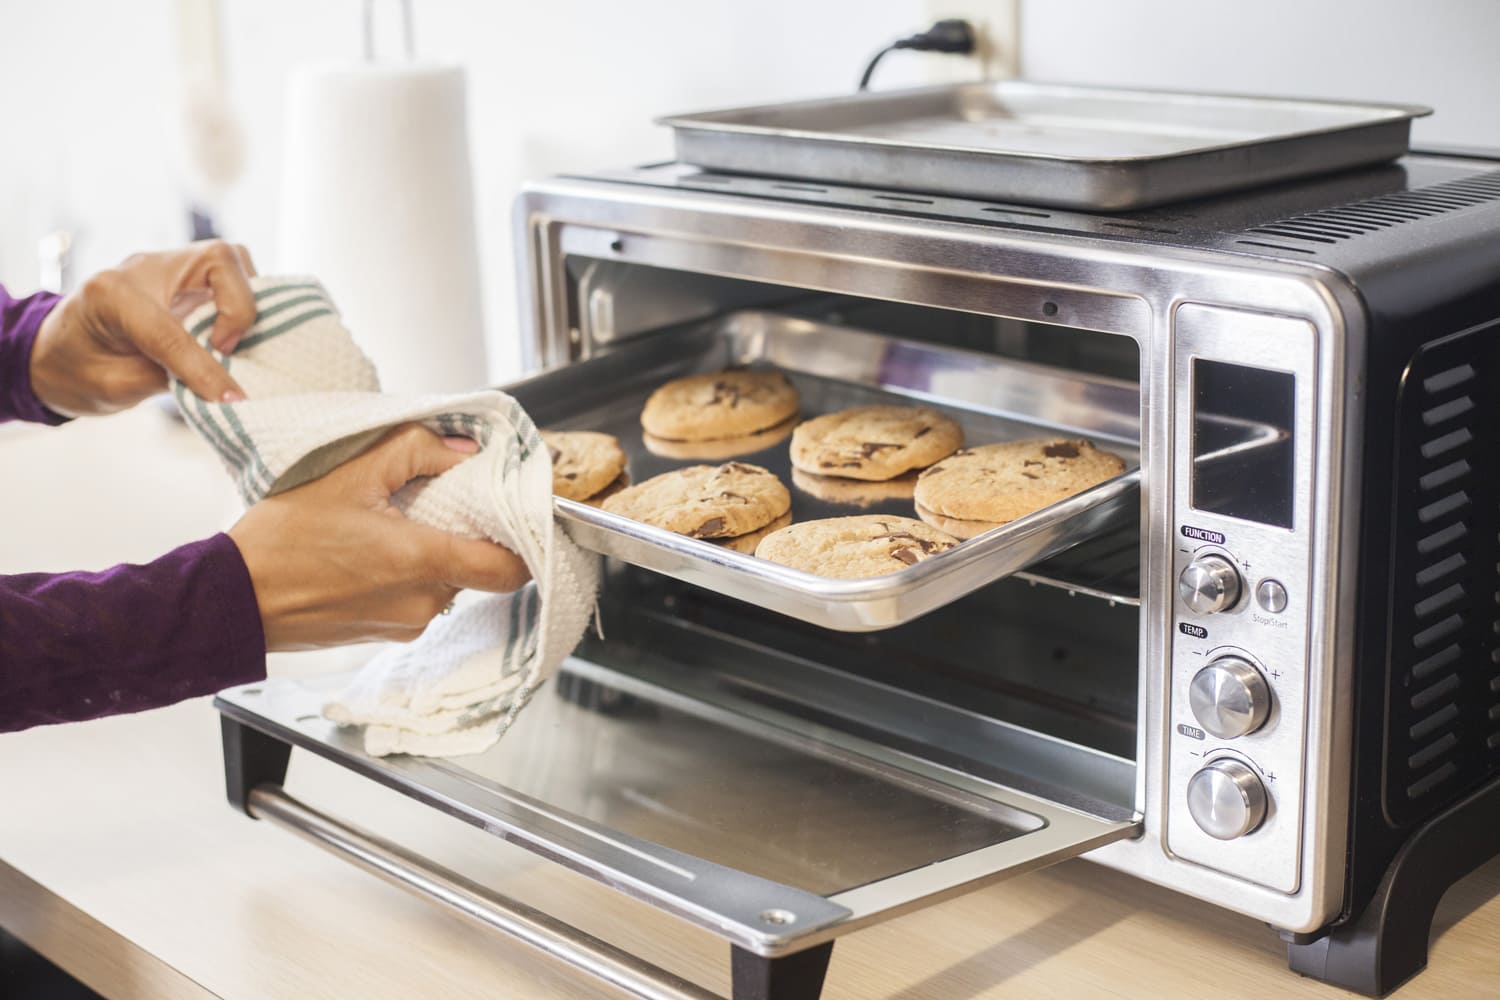 A female hand using a towel to remove a small baking sheet full of chocolate chip cookies from a silver toaster oven. The scene is a brightly lit modern kitchen counter.